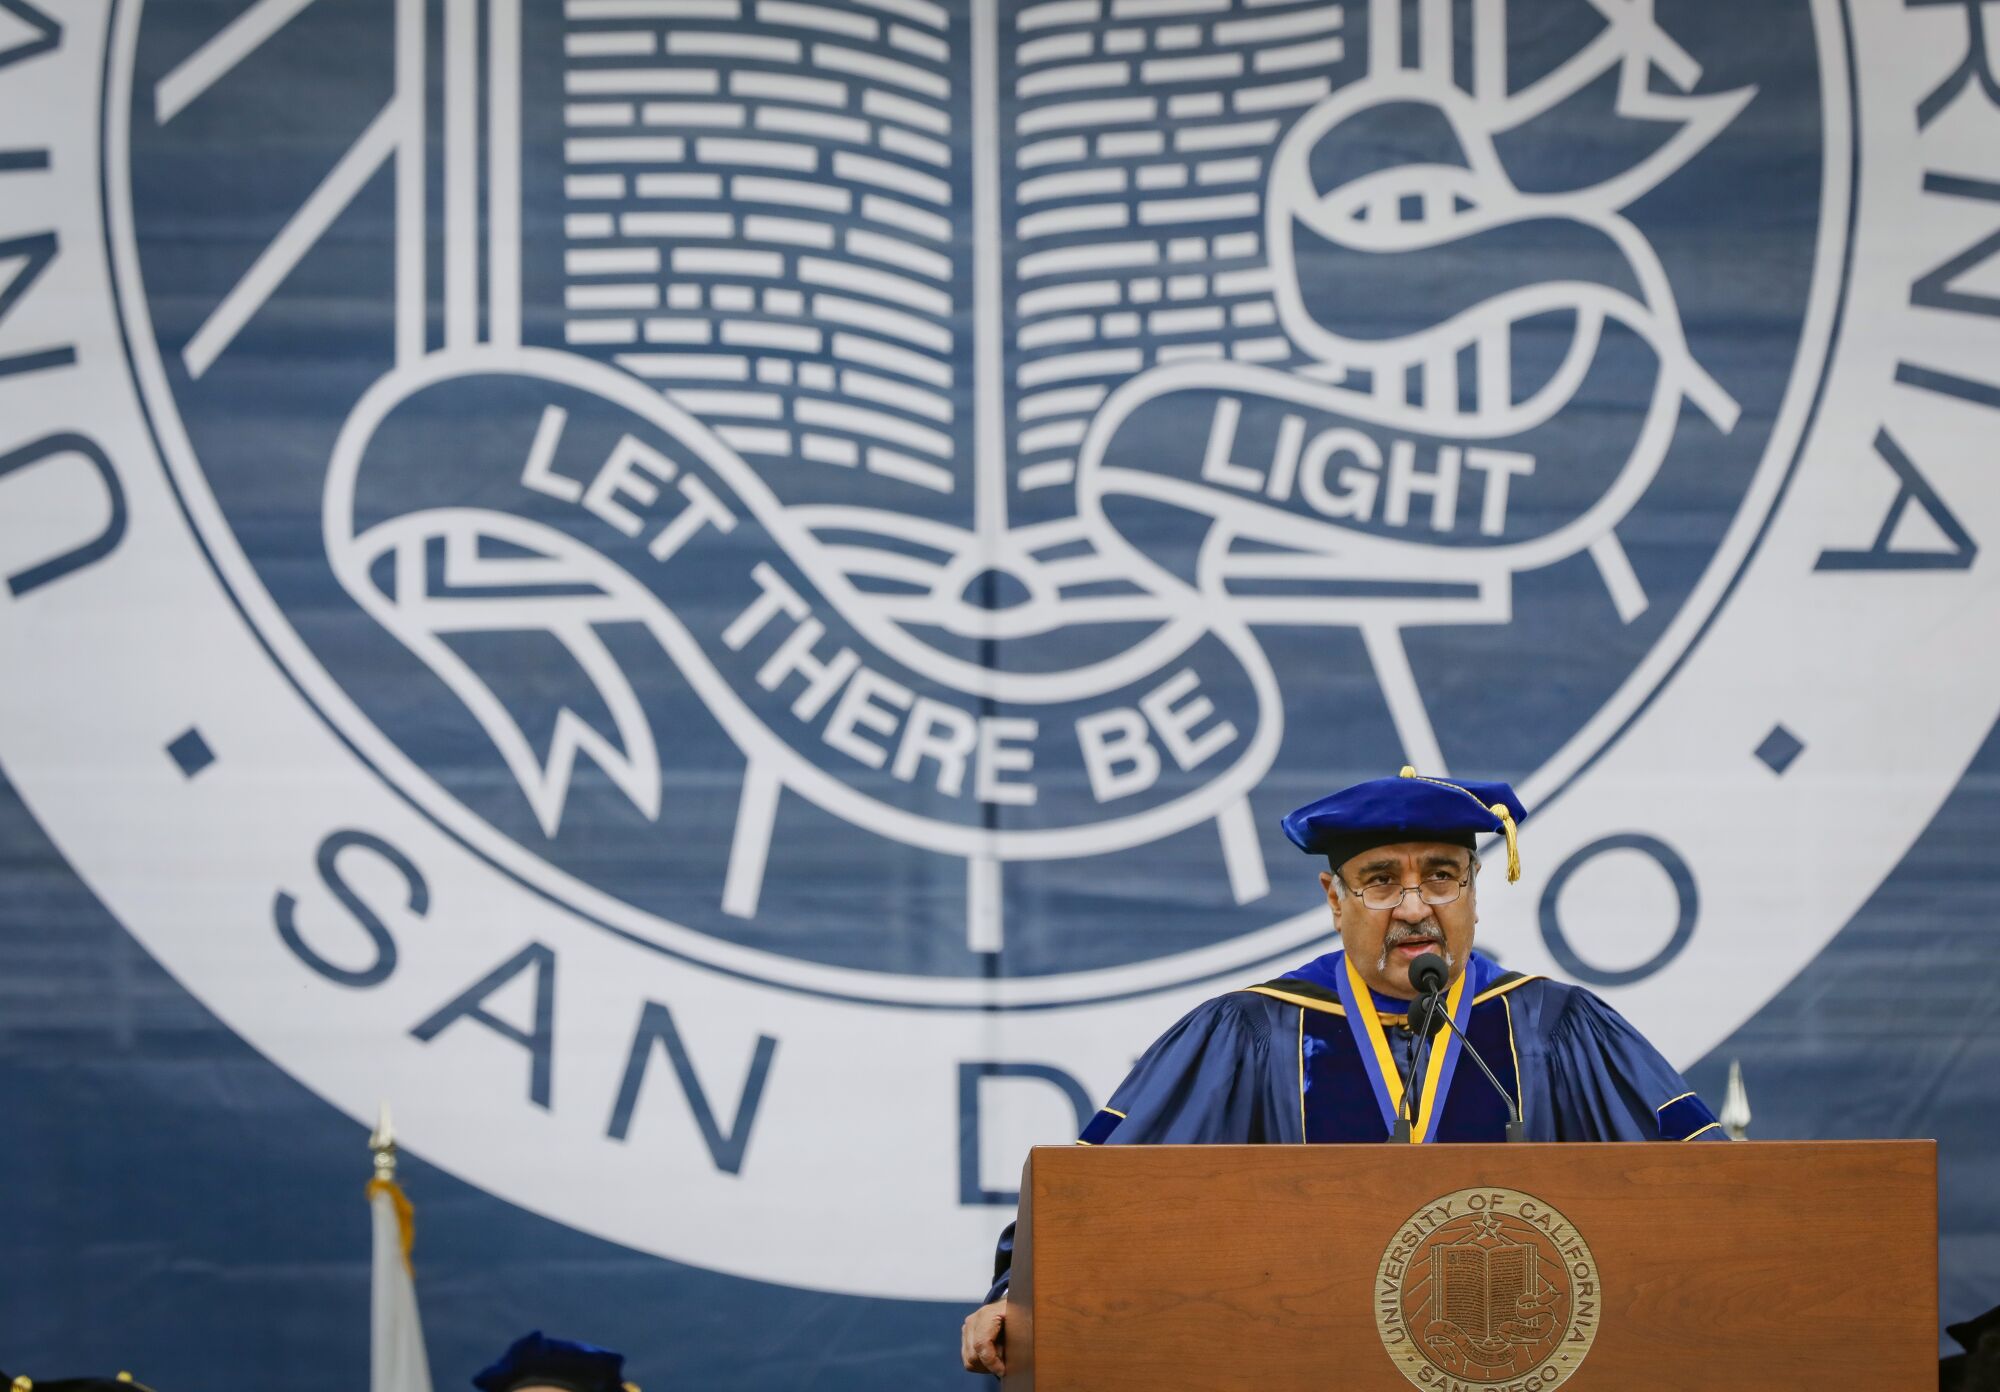 UC San Diego Chancellor Pradeep Khosla addresses graduates during an all campus commencement ceremony at RIMAC Field in 2019.